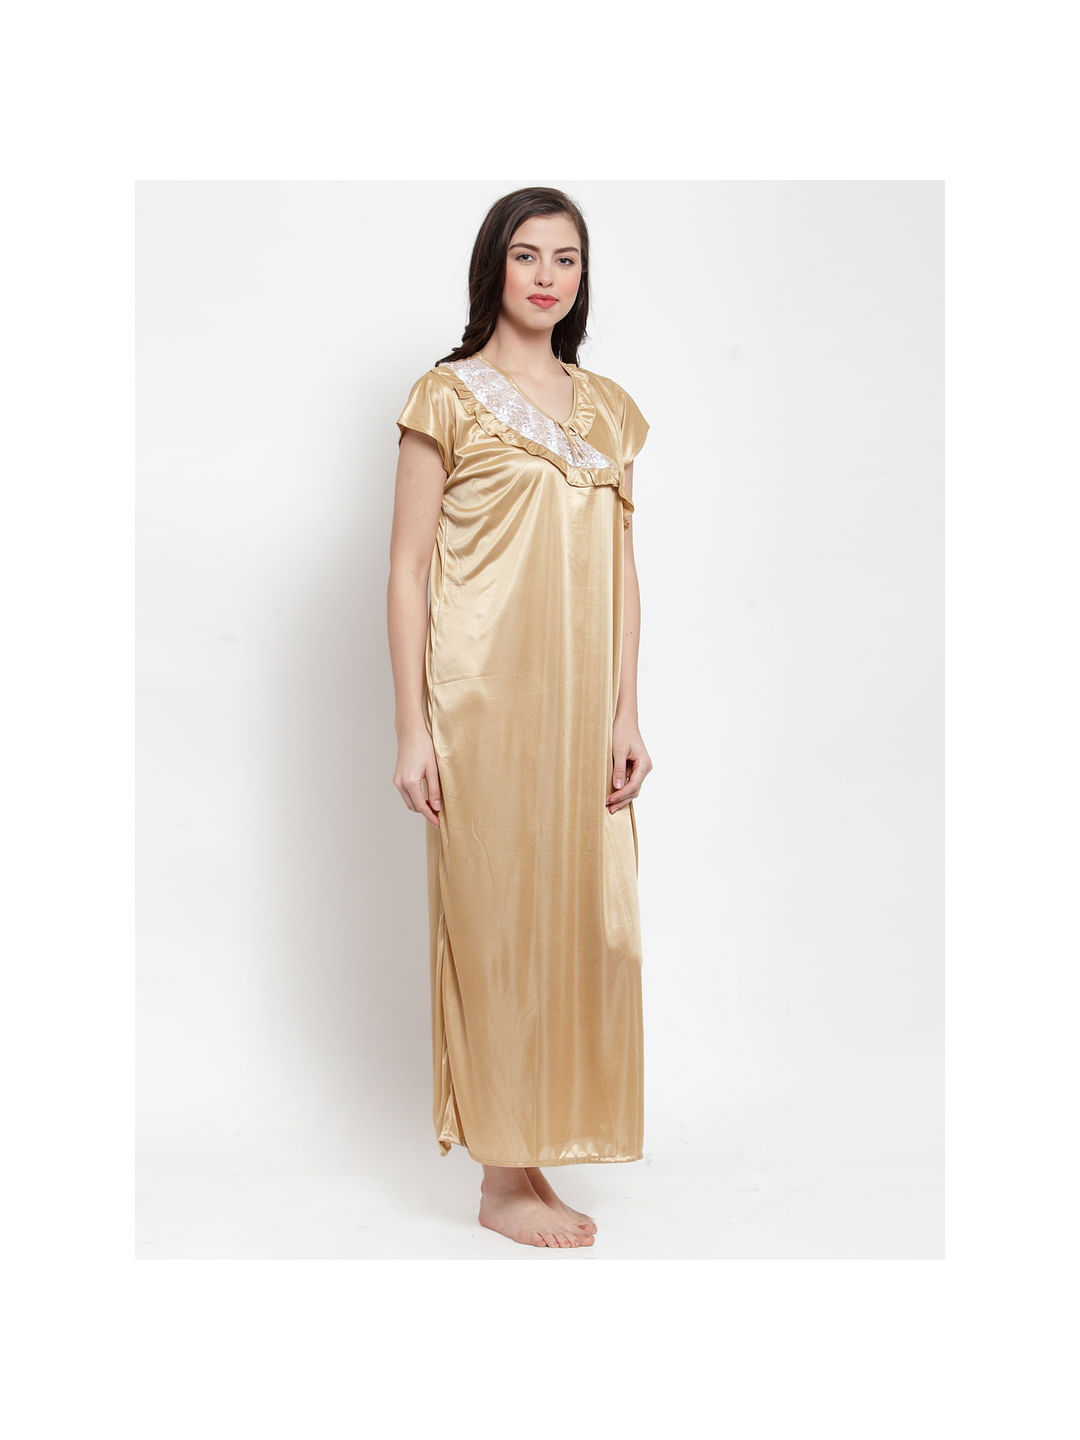 Satin Golden Solid Nighty (Free Size)